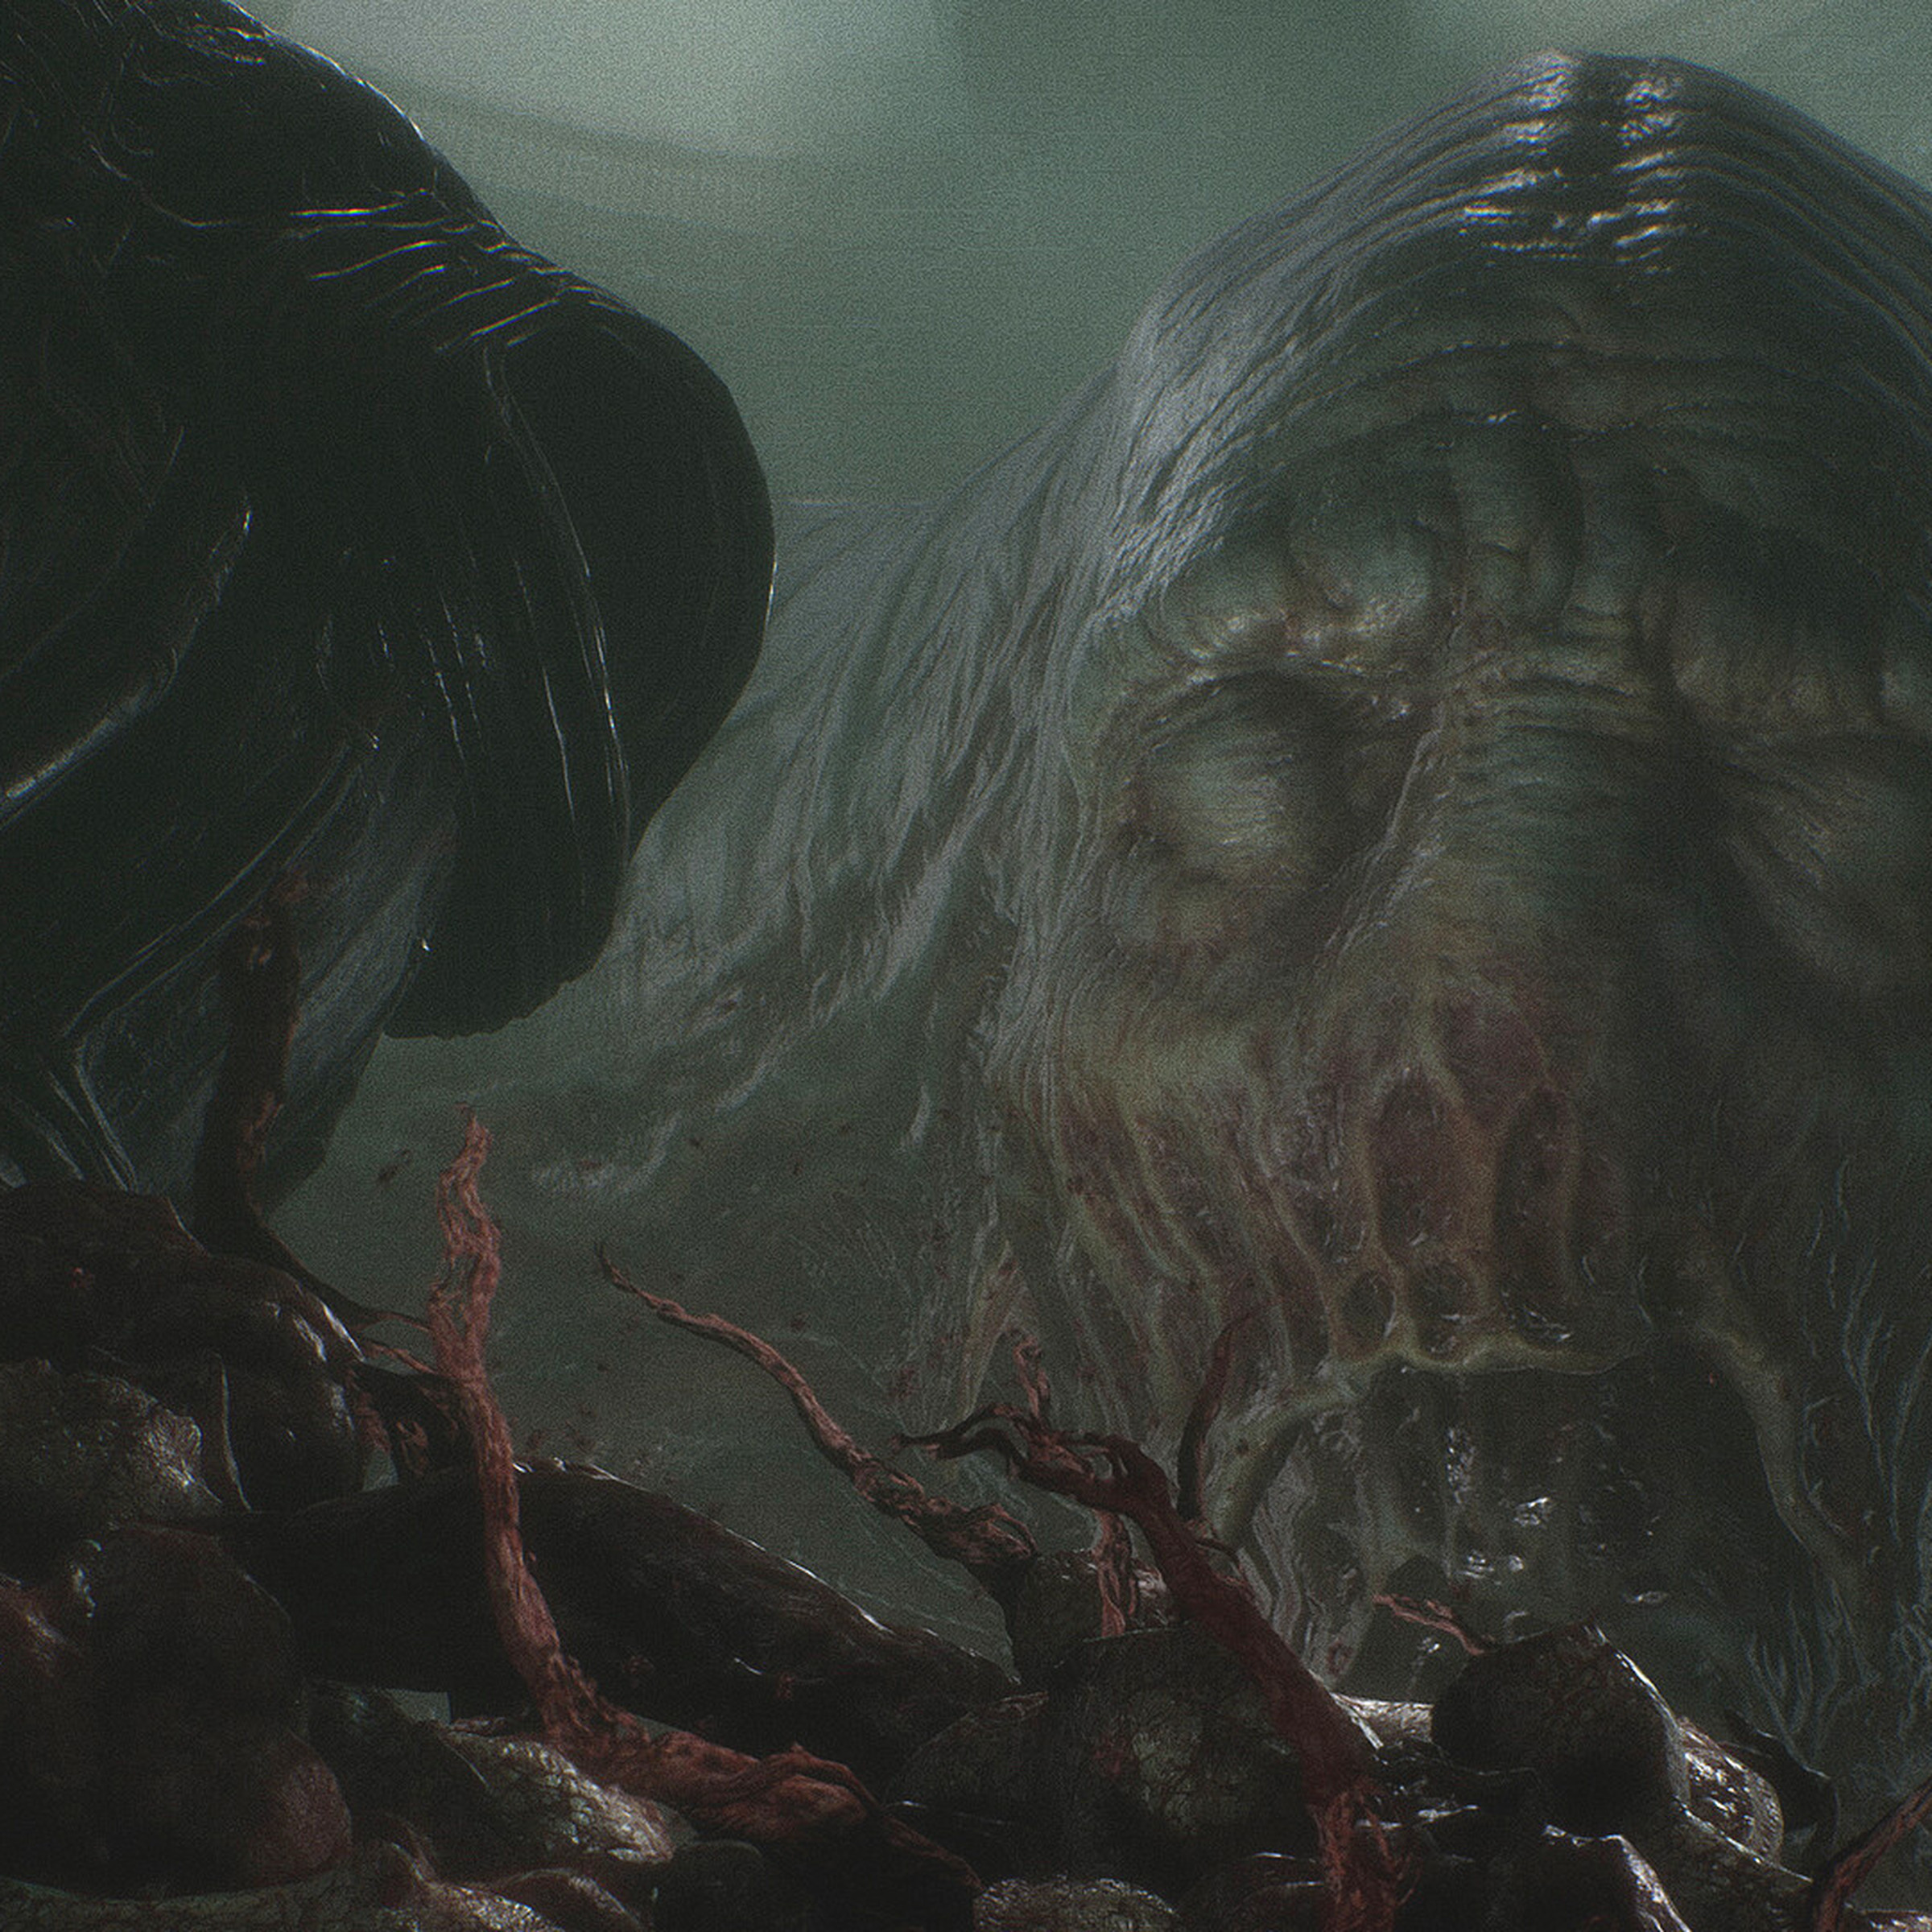 Screenshot from Scorn featuring a large fleshy head with skin covering the eye sockets with red-tinged and wrinkled lips.